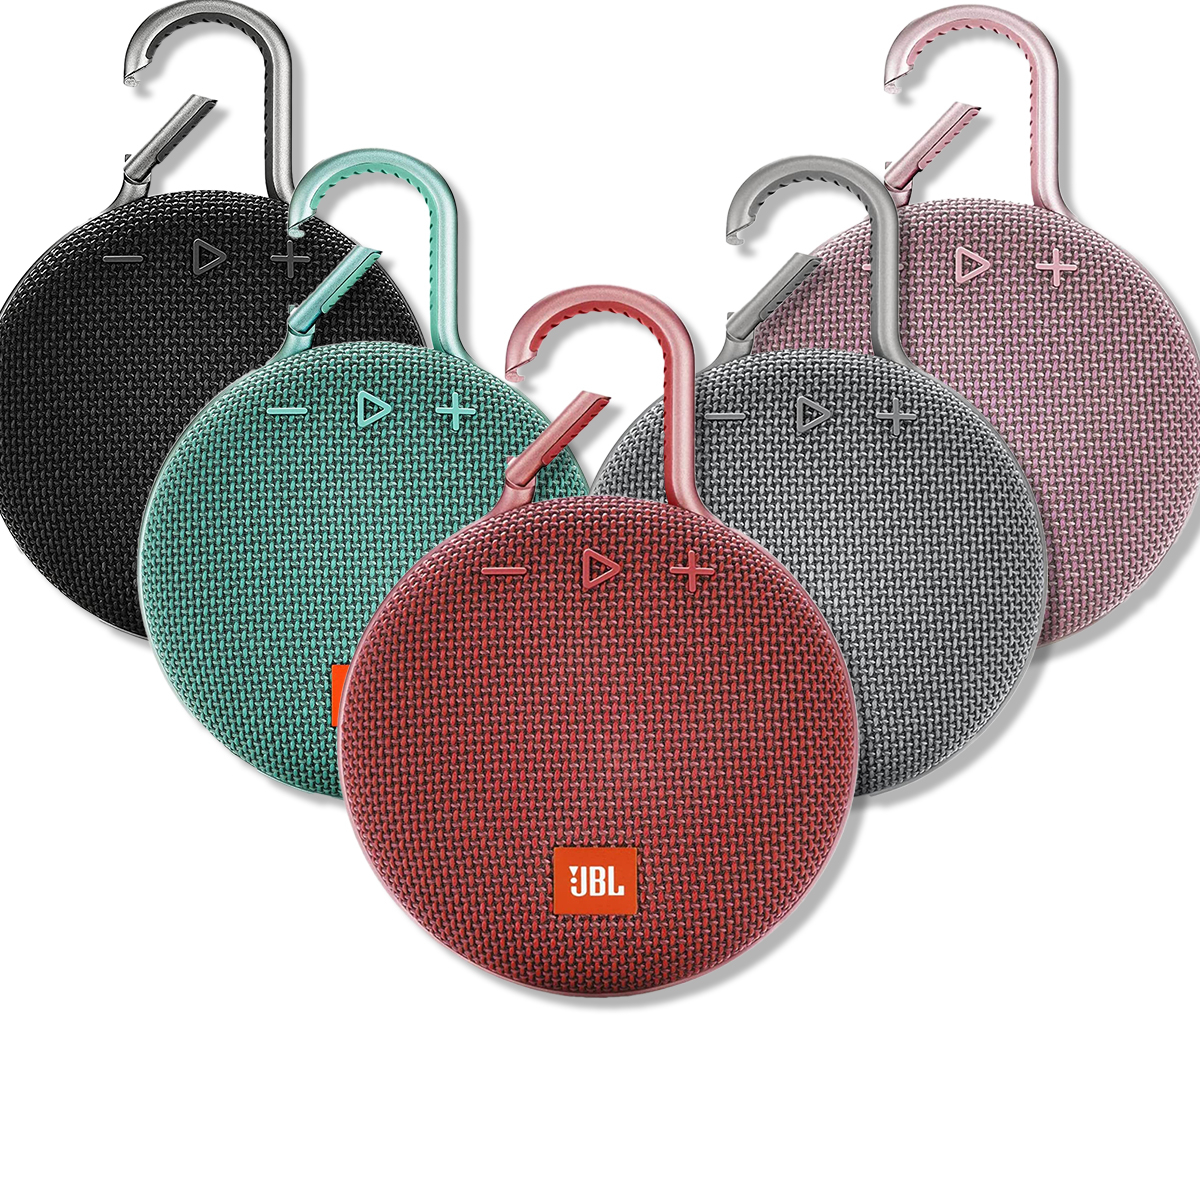 Review: JBL Clip 3 [Video]—A Very Personal Waterproof Speaker - Serious  Insights